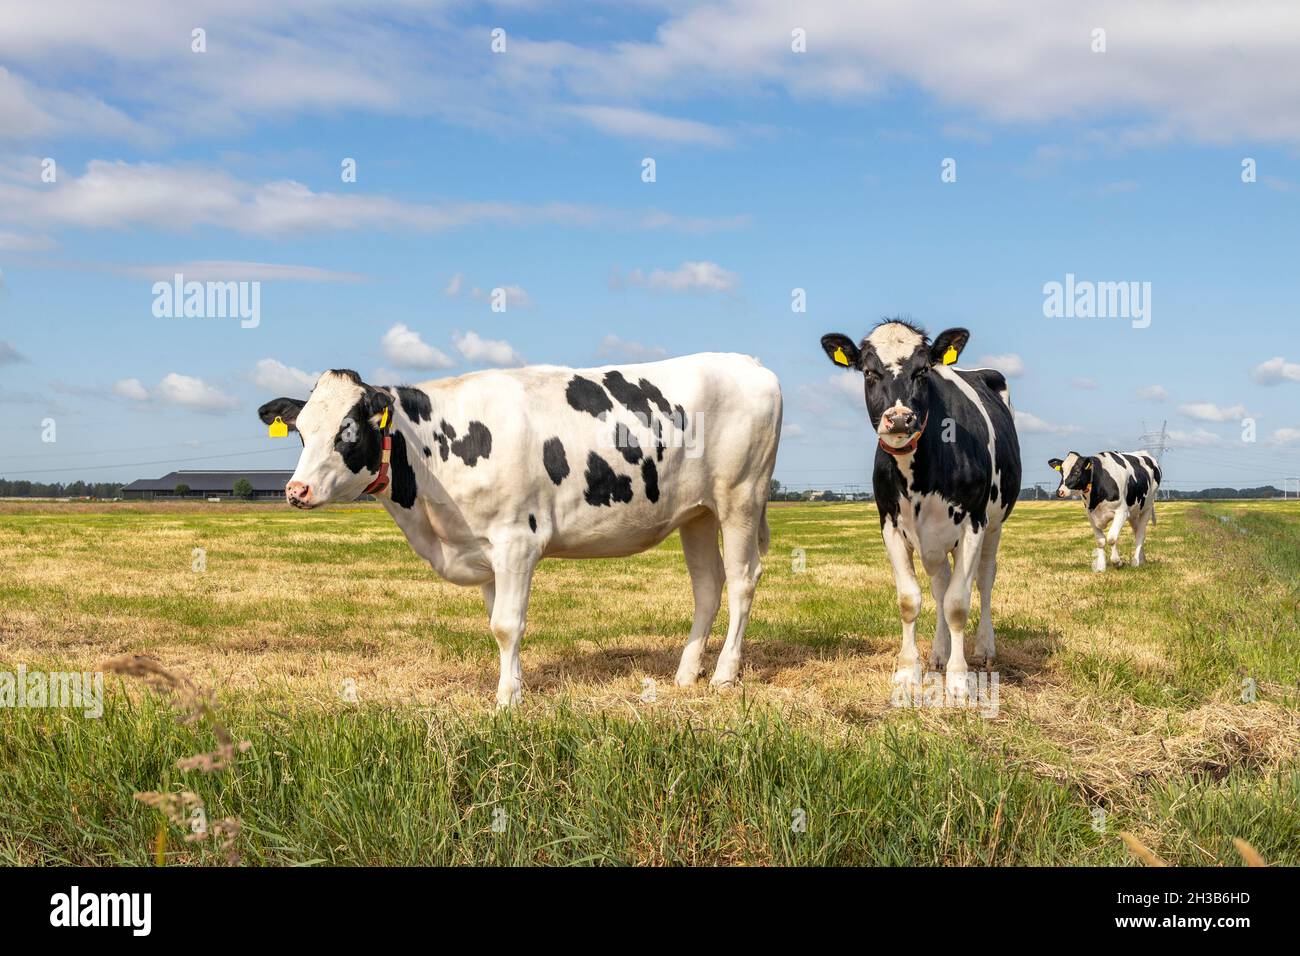 Two cows, frisian holstein black and white, standing in a pasture under a blue sky and horizon over land. Stock Photo